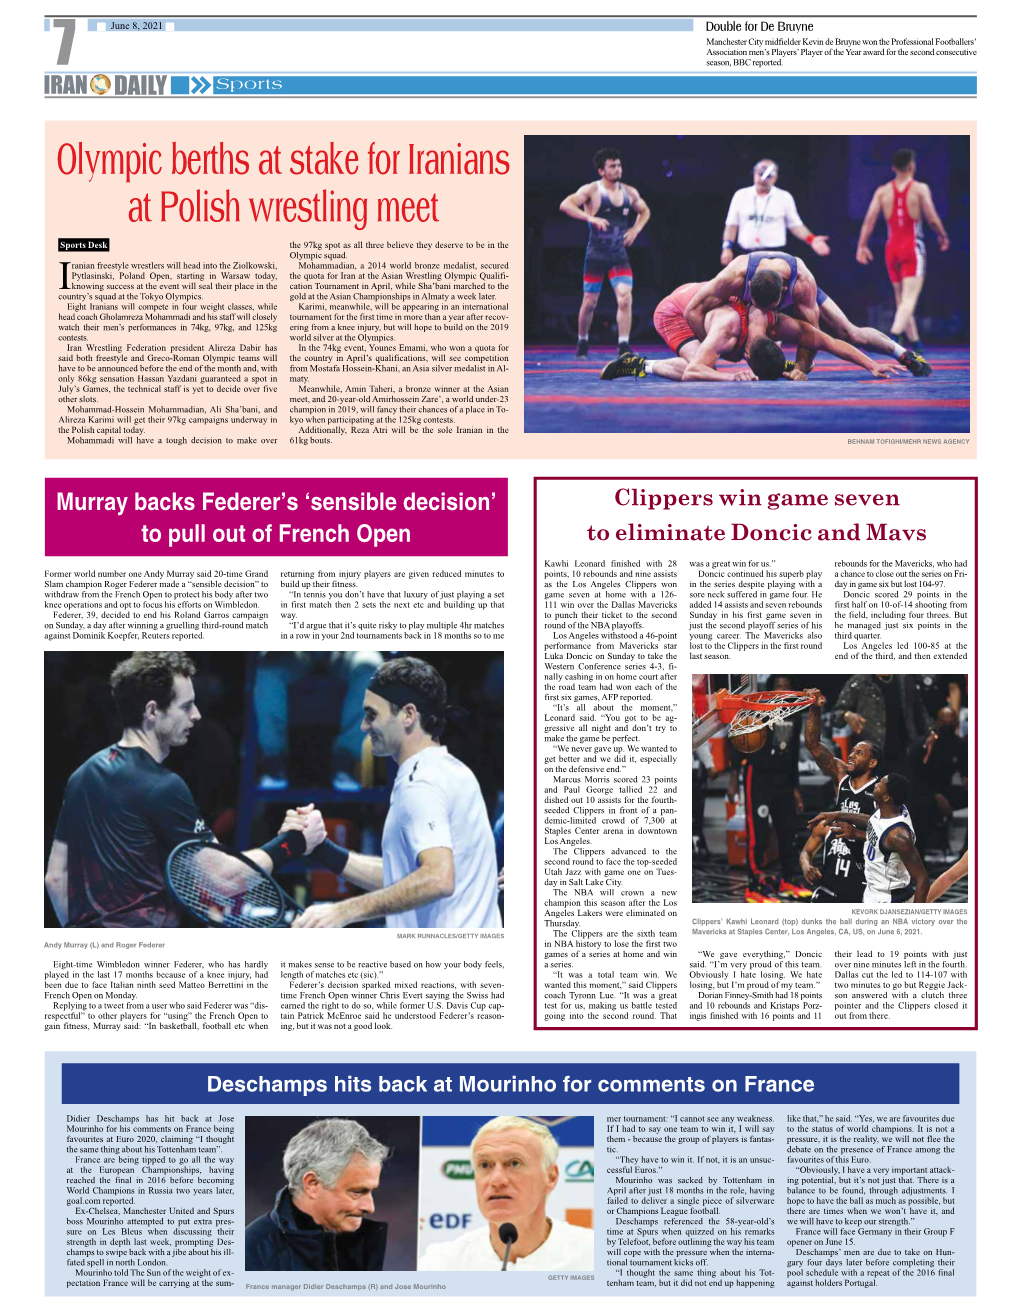 Olympic Berths at Stake for Iranians at Polish Wrestling Meet